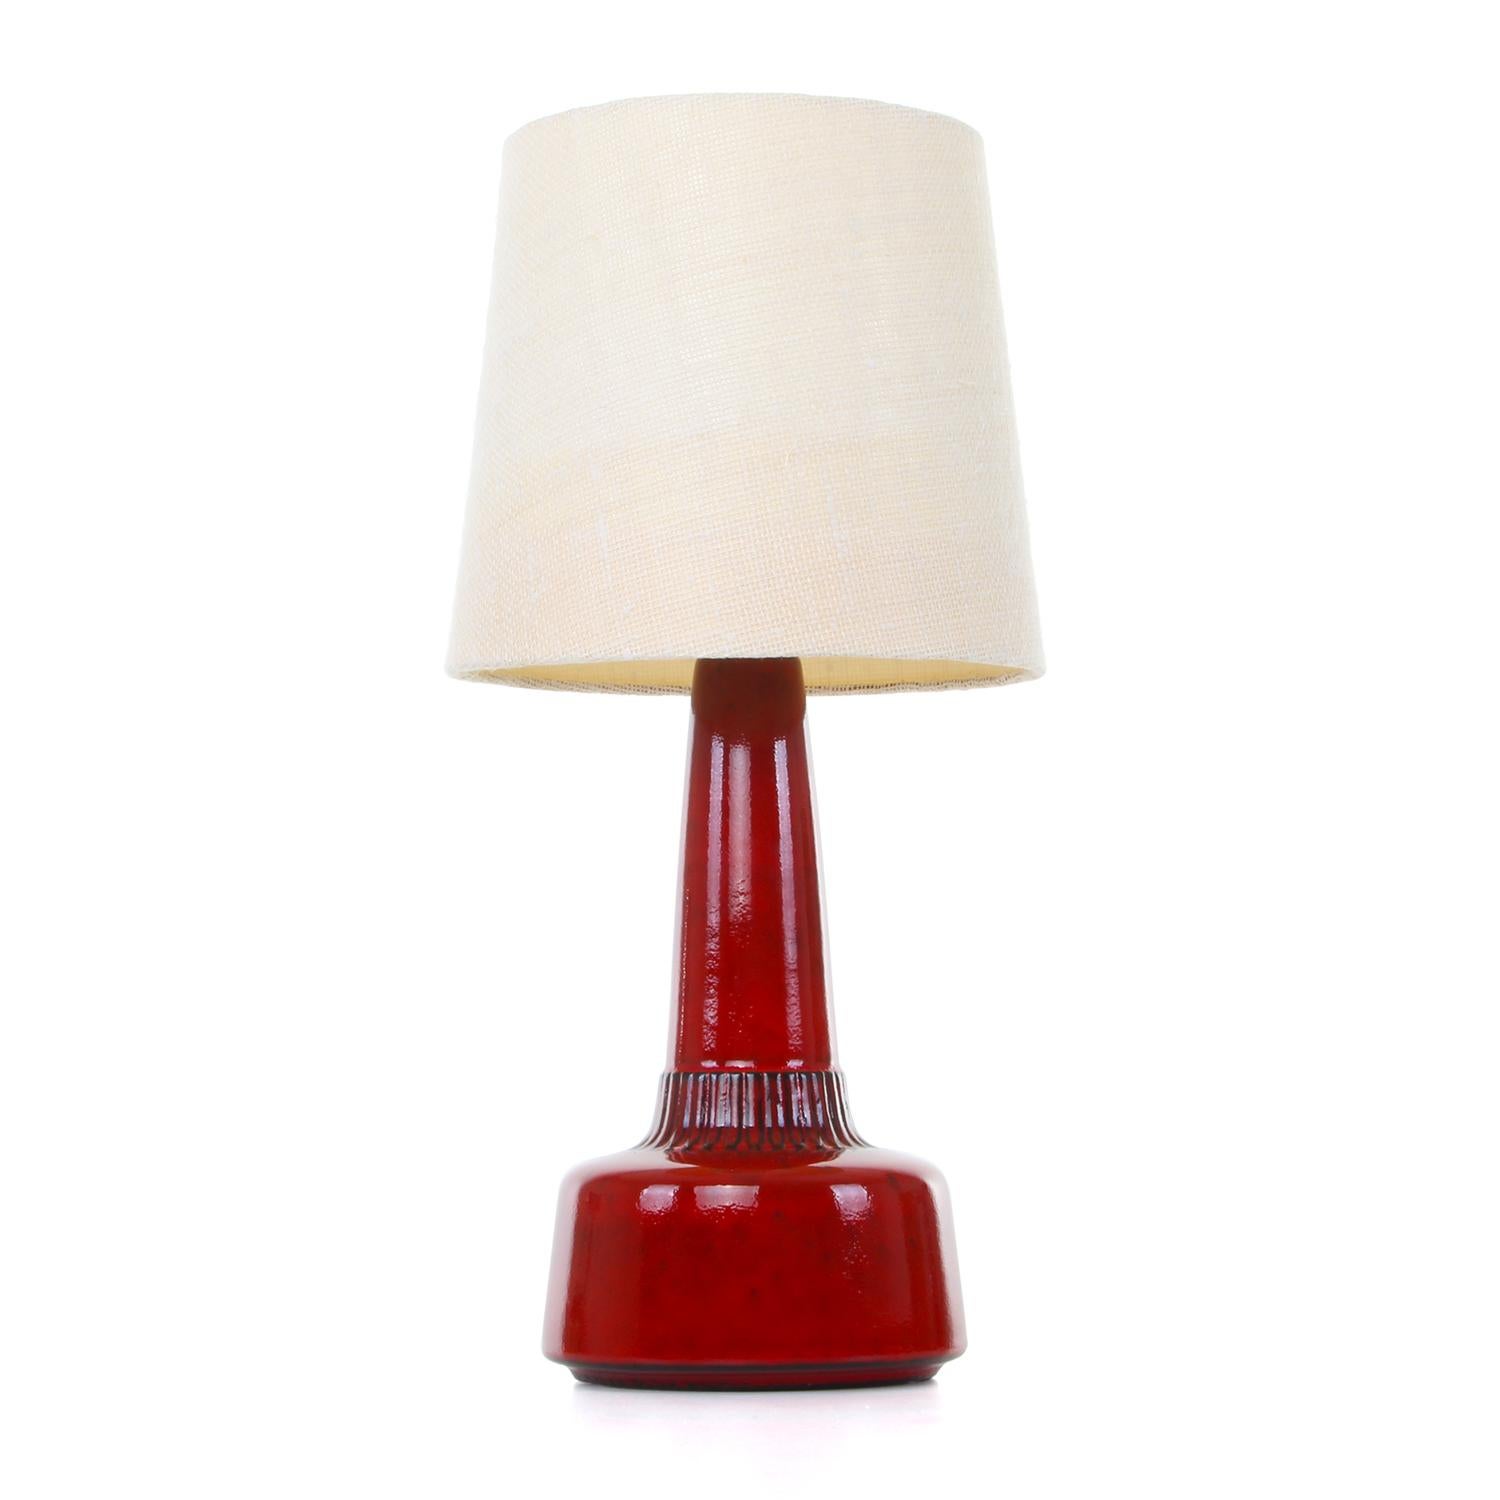 Scandinavian Modern Red Table Lamp No. 1080-2 by Einar Johansen for Soholm, 1960s, Shade Included